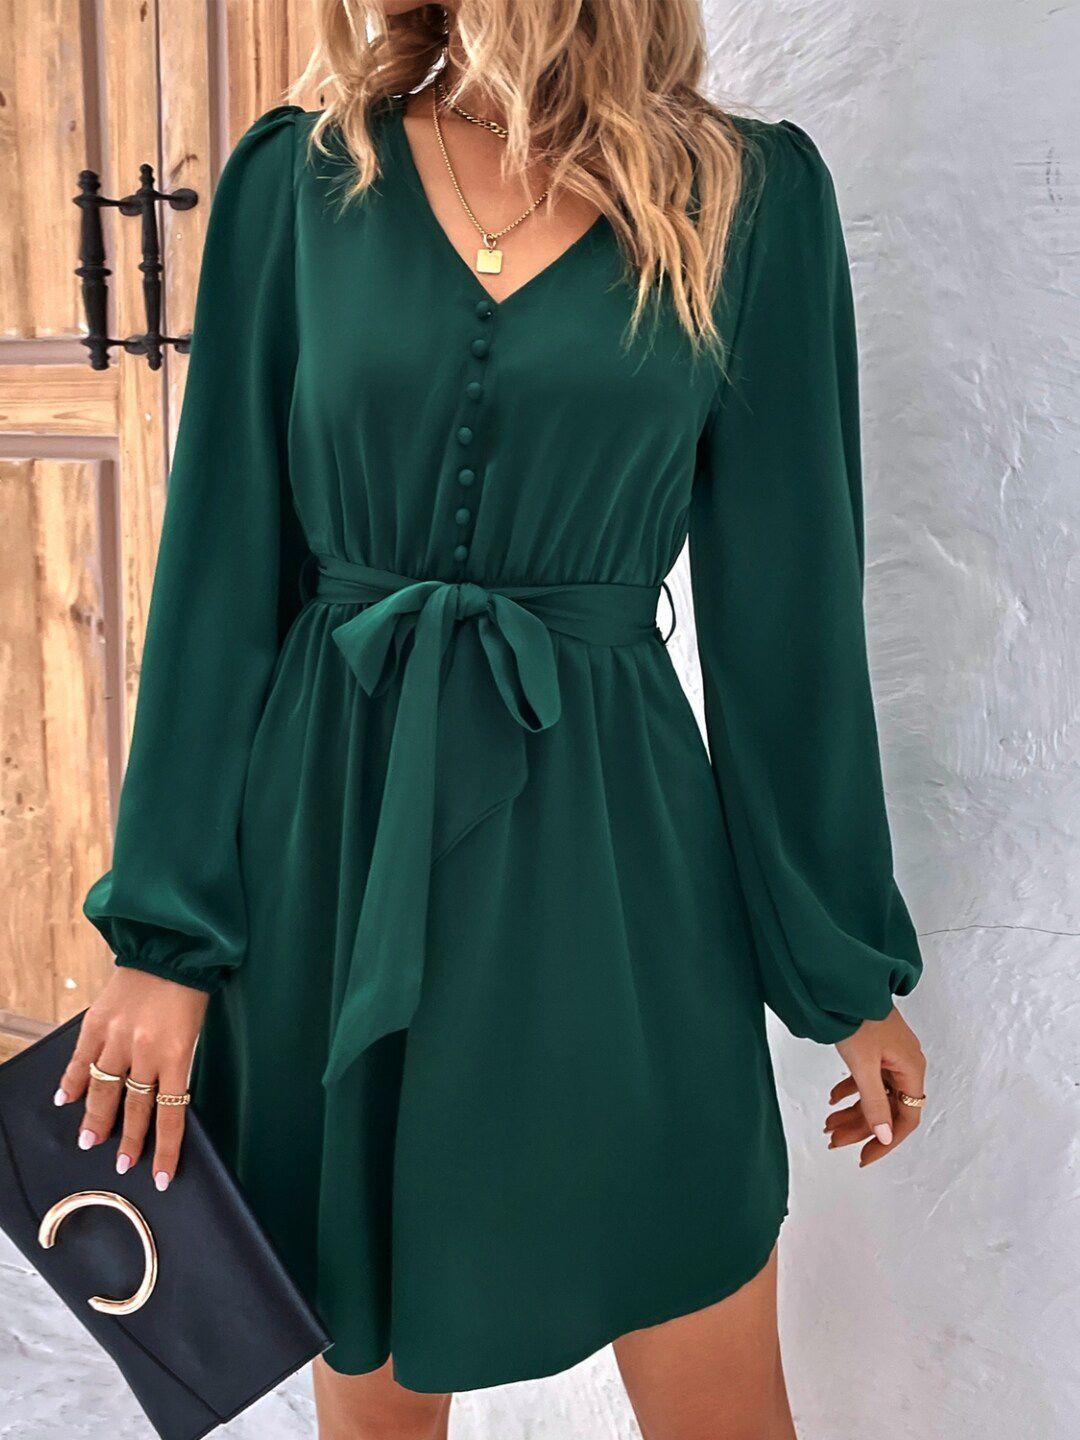 stylecast green v-neck puff sleeves fit and flare dress